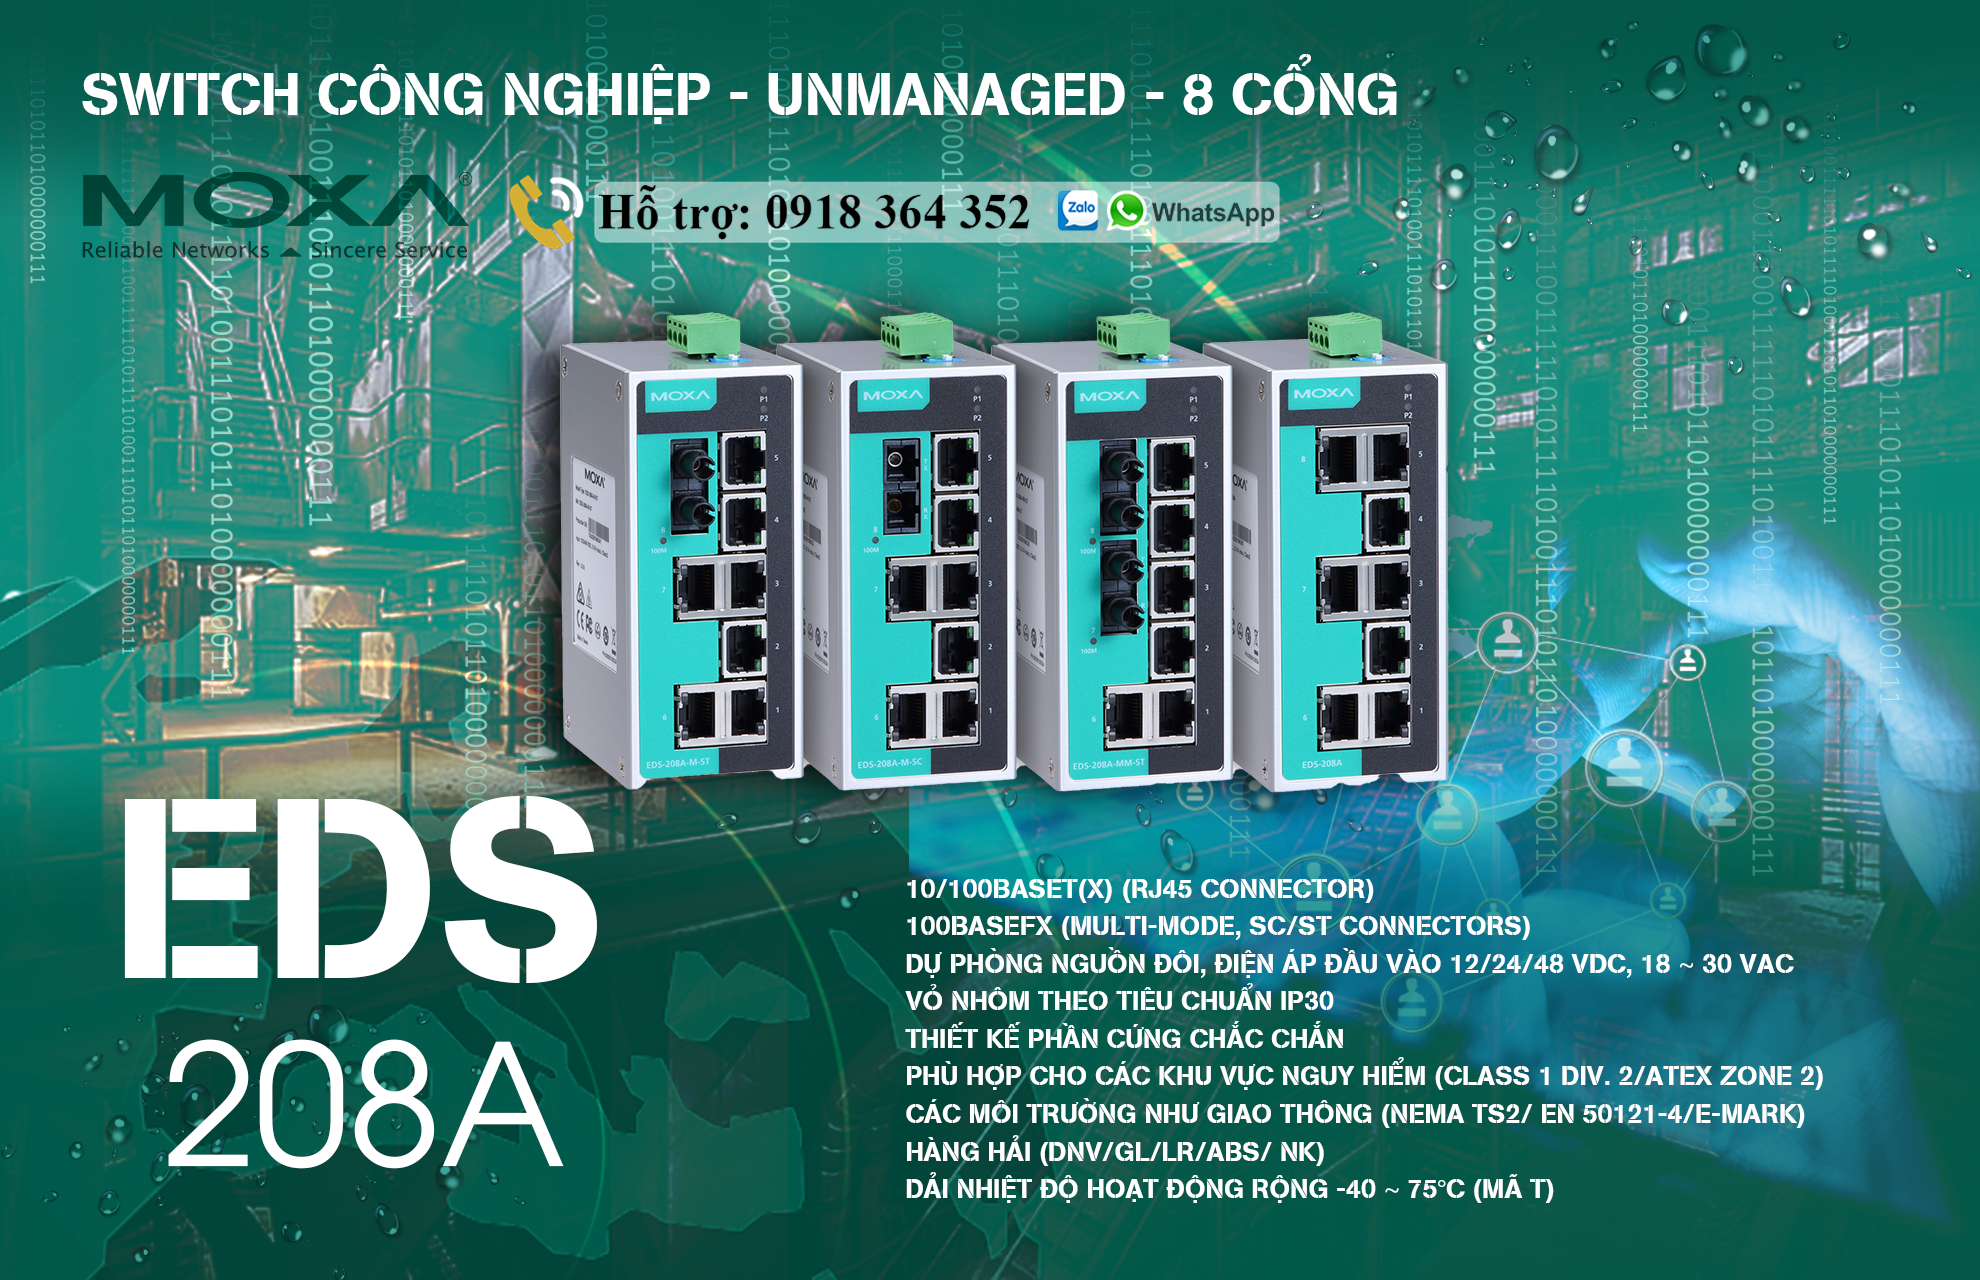 eds-208a-m-st-t-switch-cong-nghiep-8-cong-toc-do-10-100m-dai-ly-switch-mang-cong-nghiep-moxa-viet-nam.png